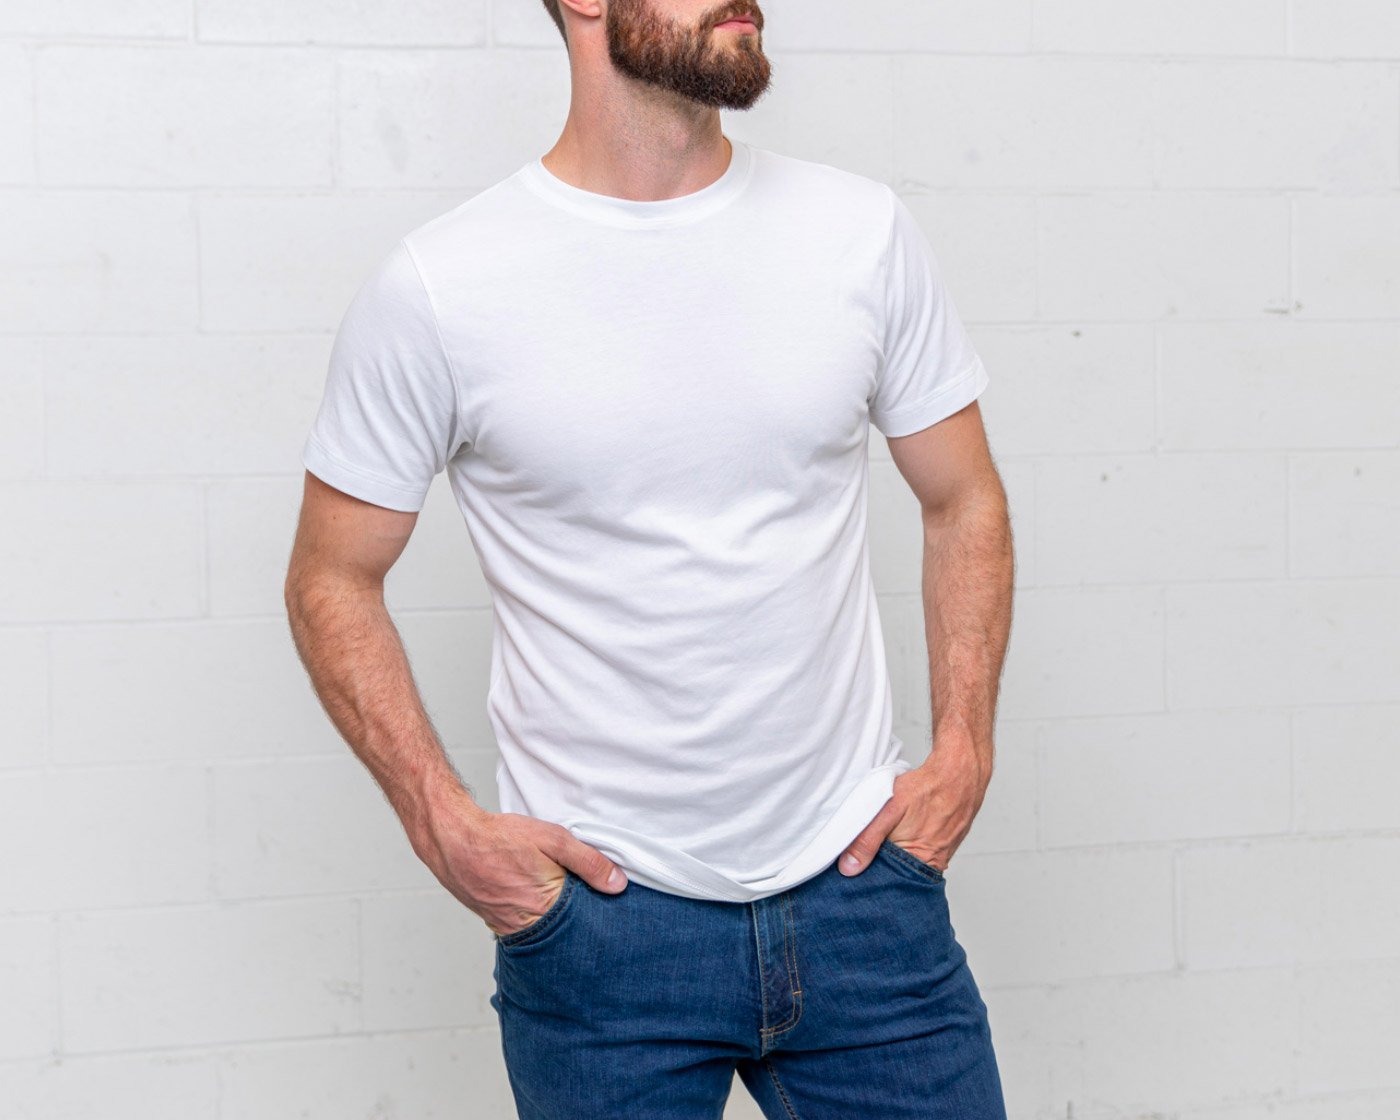 Men's Fitted T-Shirts